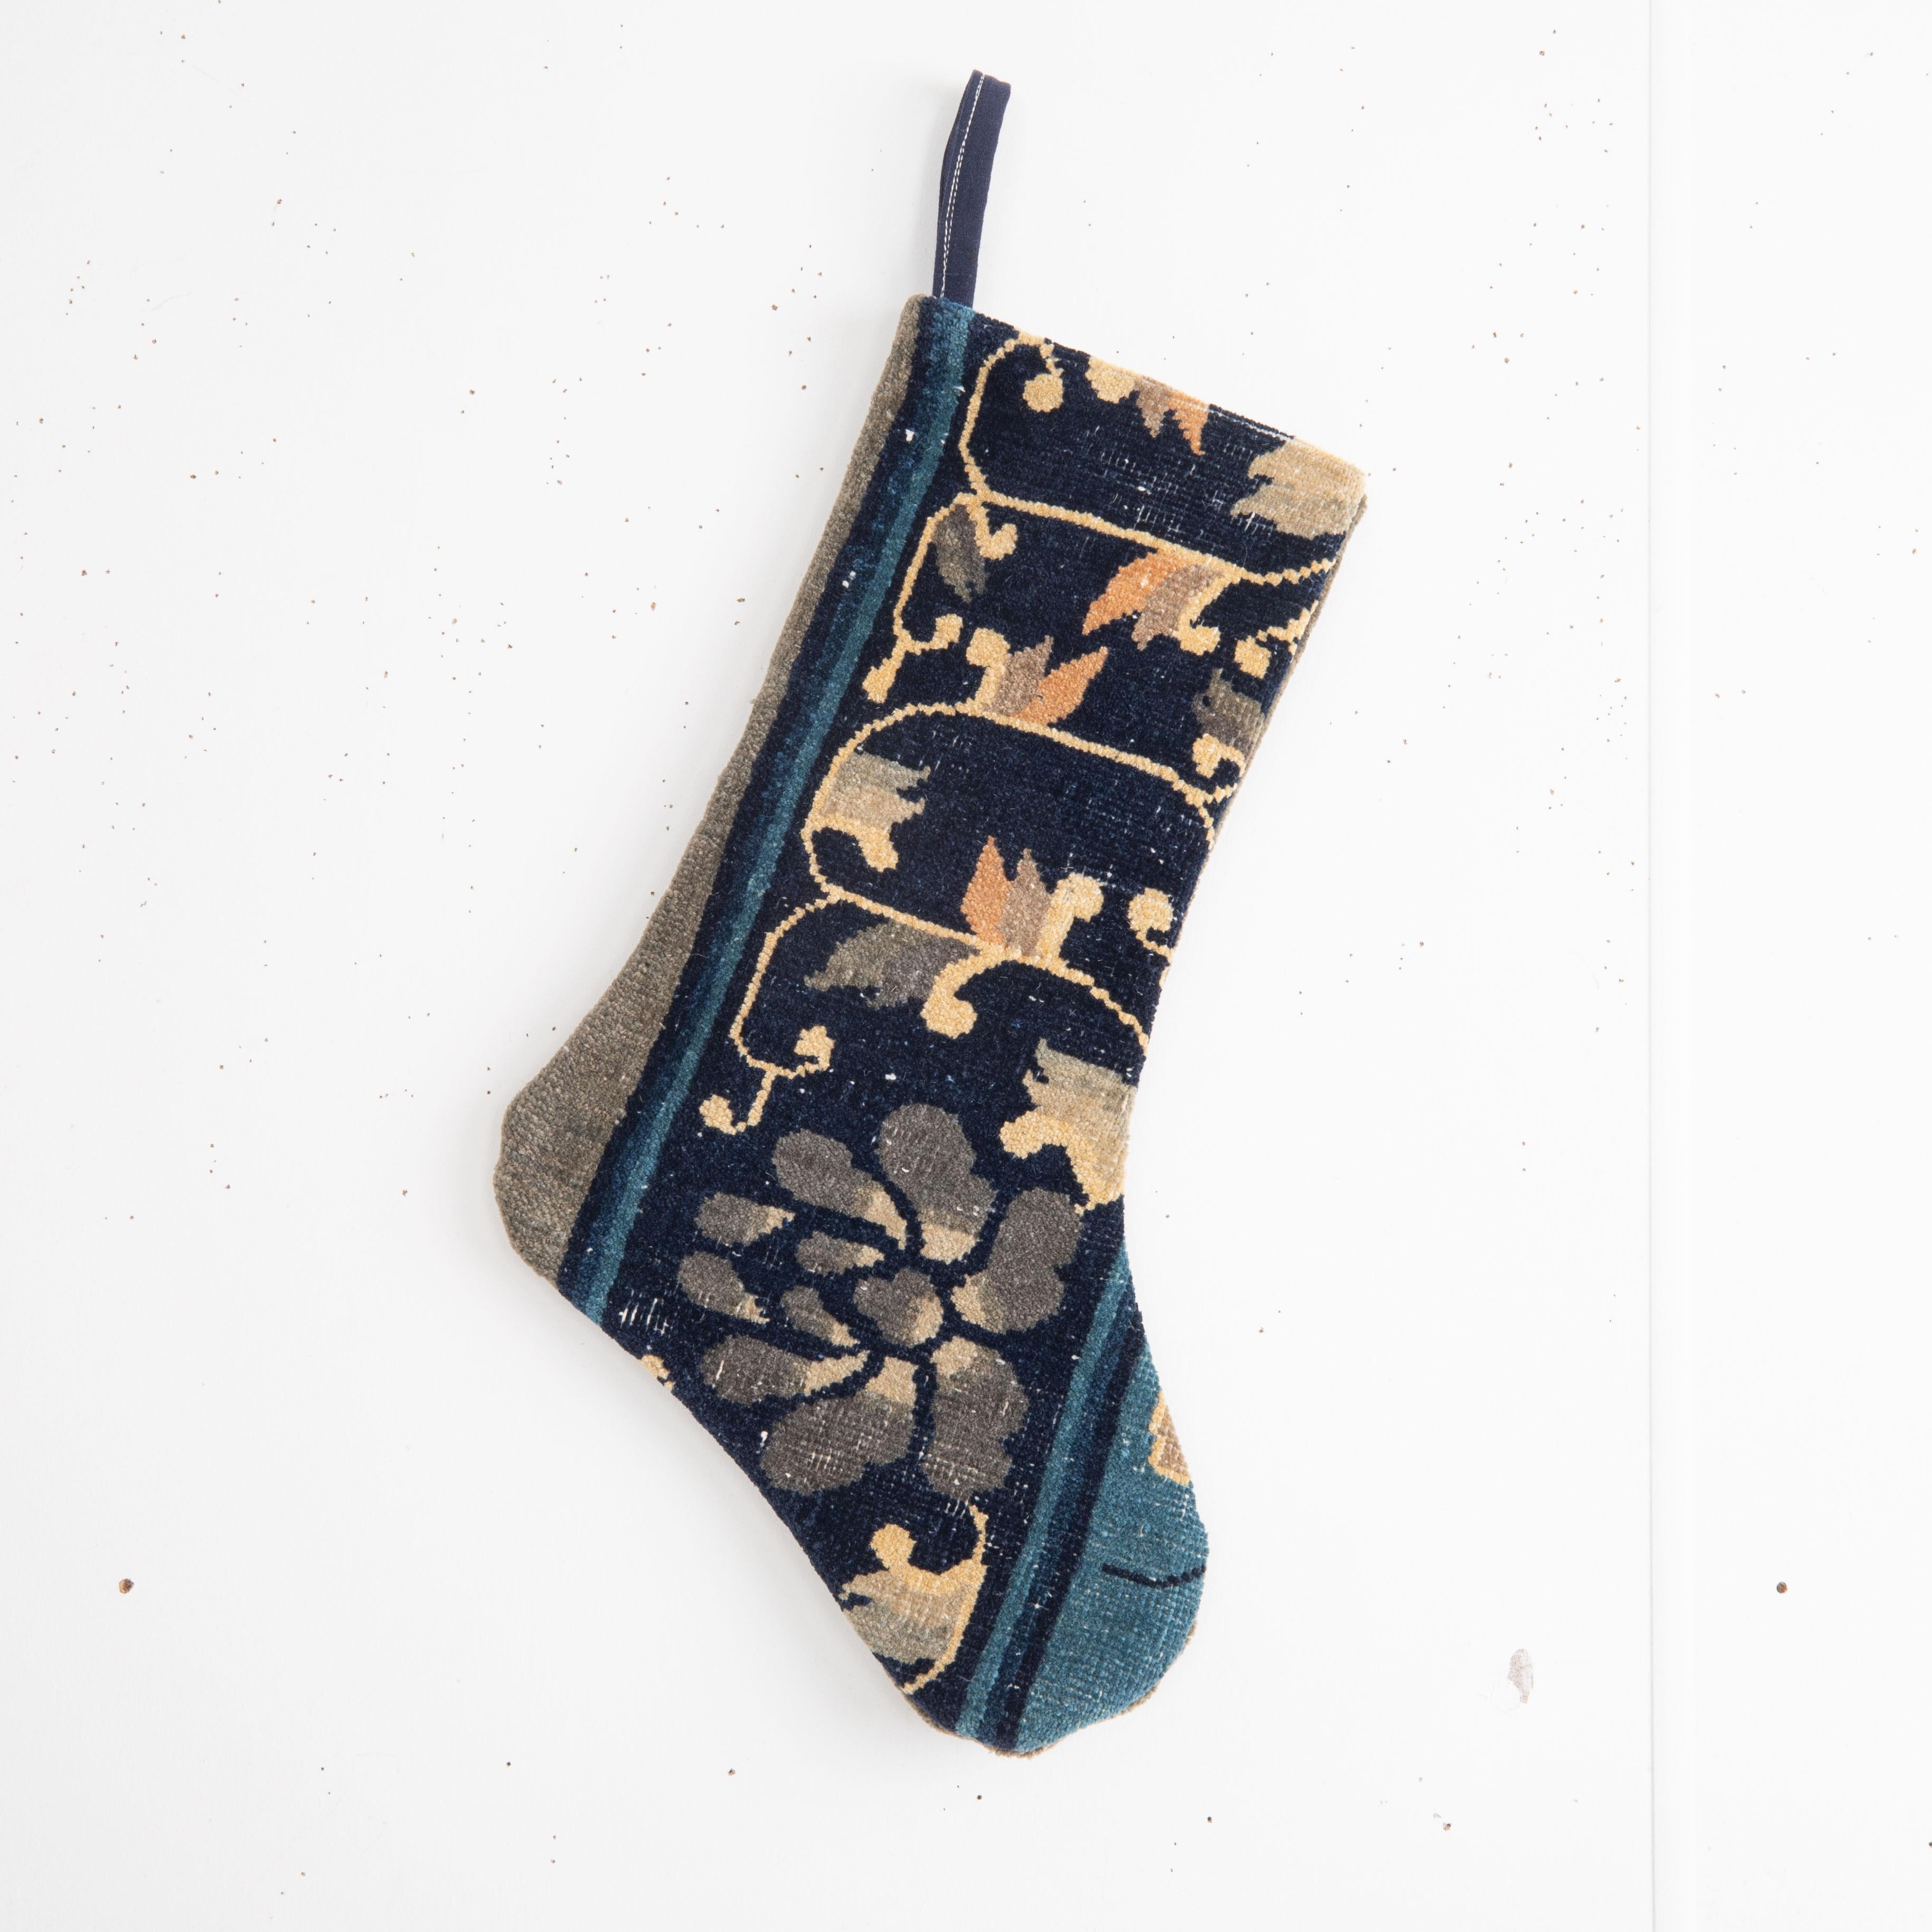 This Christmas Stocking was made from a late 19th or Early 20th C. Chinese rug fragments.

Please note, this stocking was made from Chinese rug fragments.

